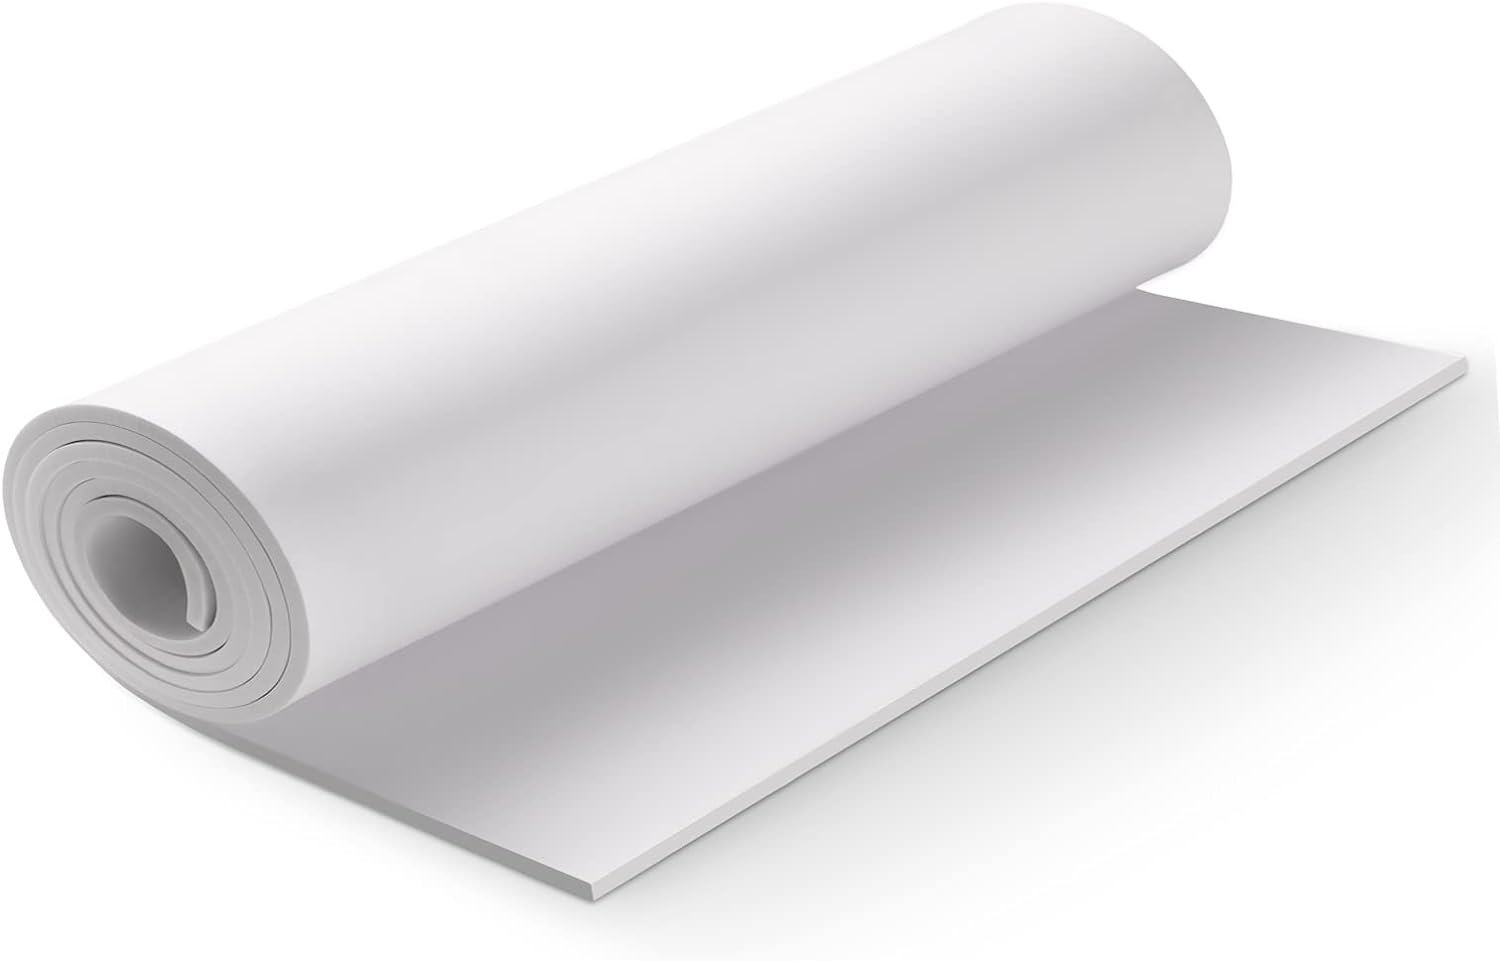 Premium Cosplay Eva Foam Sheet 3mm Thick 1mm to 10mm White Foam Sheets Roll 59"x13.9" High Density 86kg/m3 For Cosplay Costume Crafts DIY Projects By PAIDU